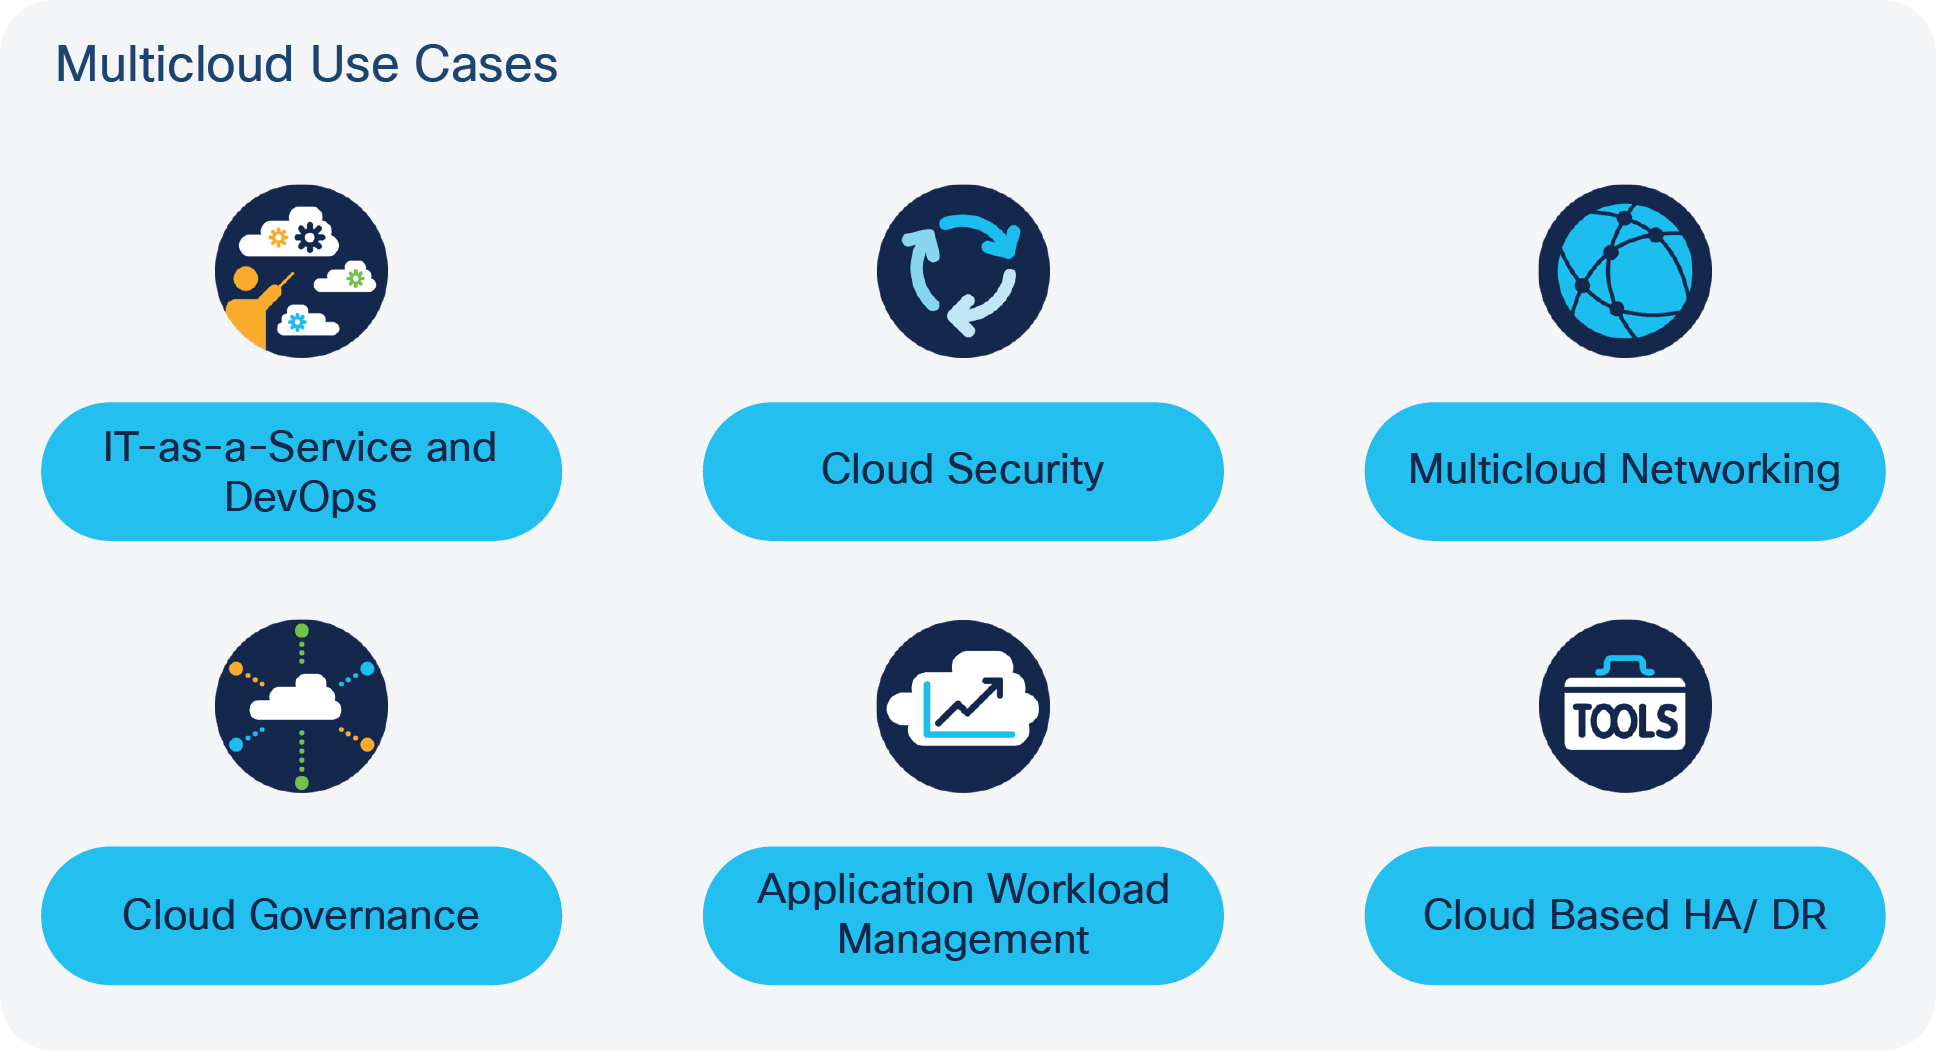 Multicloud Use Cases